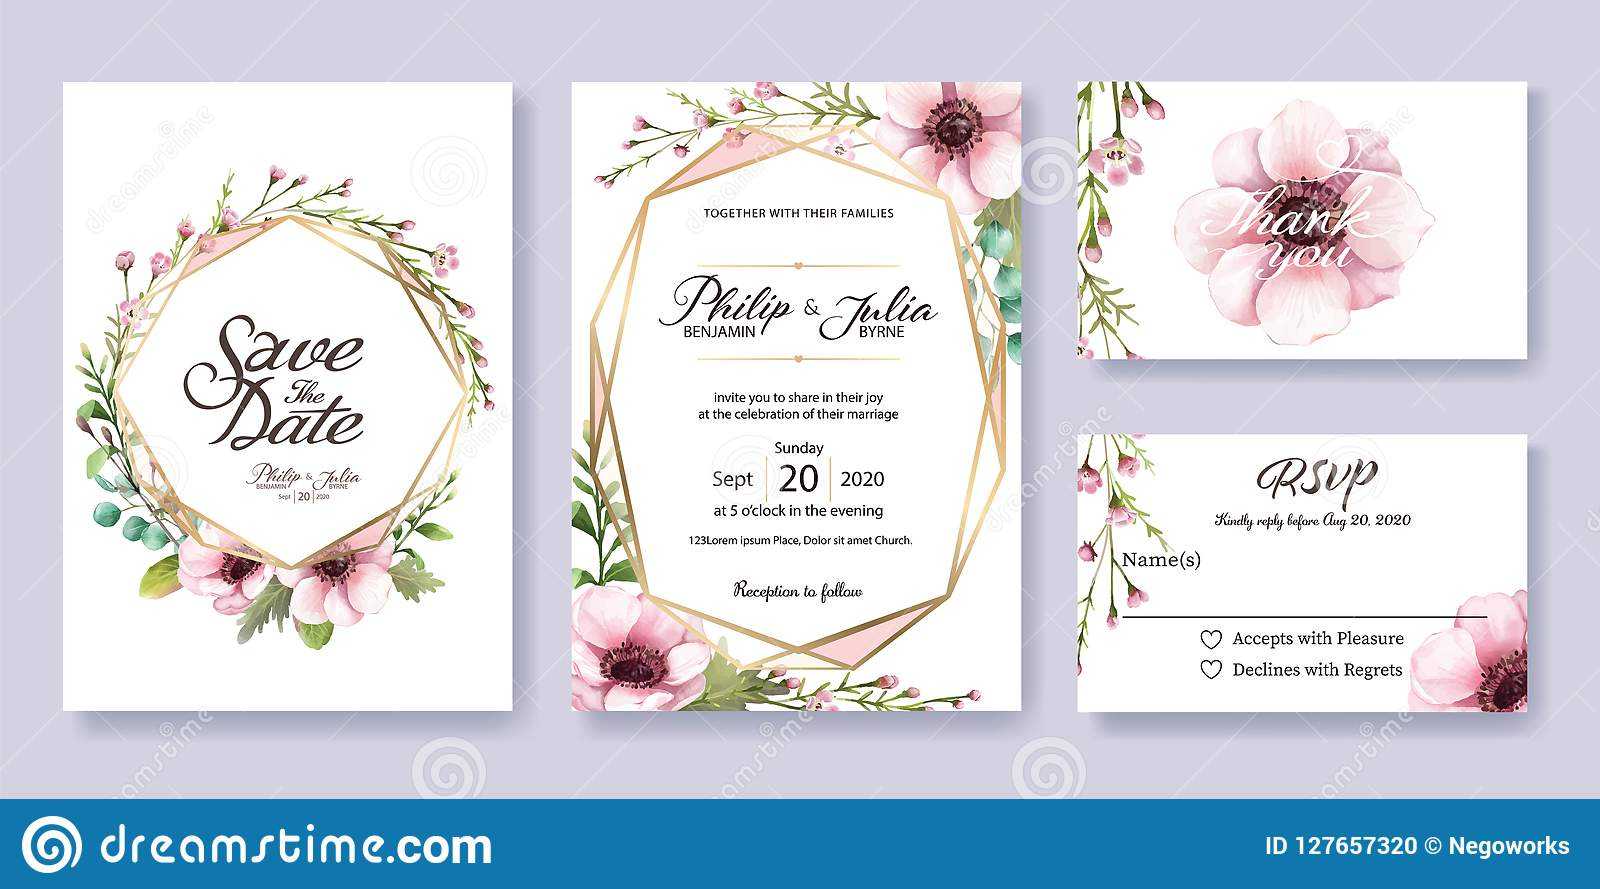 Wedding Invitation, Save The Date, Thank You, Rsvp Card Pertaining To Free Printable Wedding Rsvp Card Templates